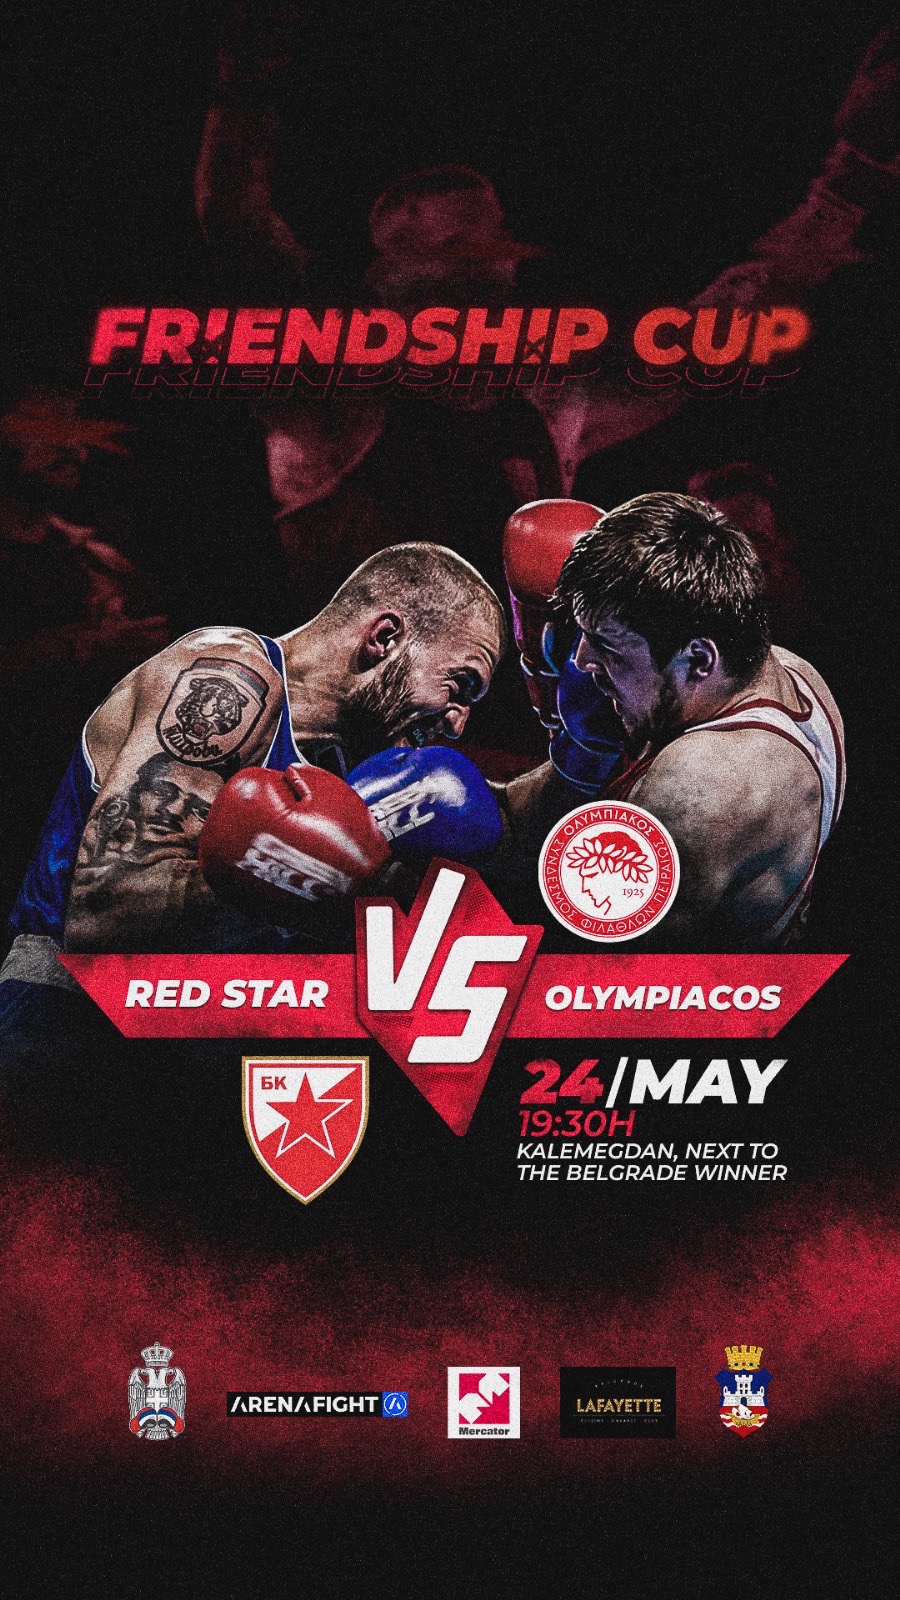 Comming very soon 2024 Olympiacos boxing club will meet Red Star boxing club in the ring in Belgrade, Serbia